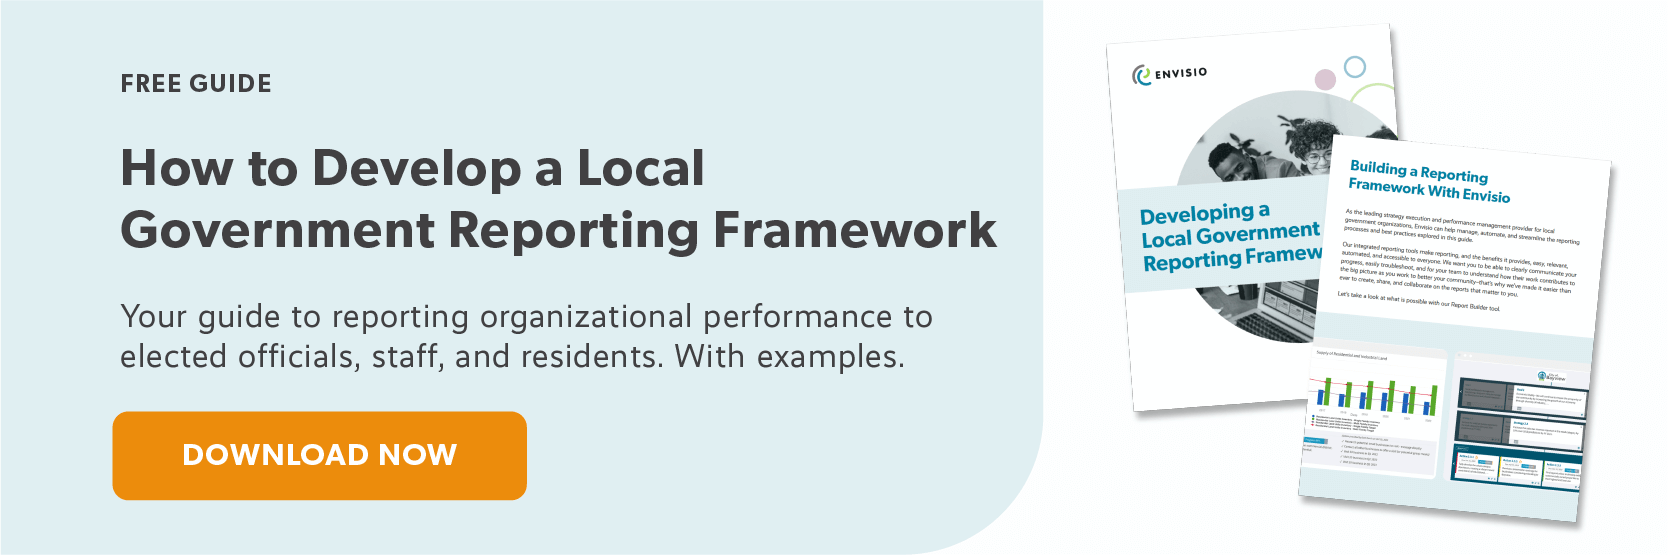 Local Government Reporting Framework CTA button